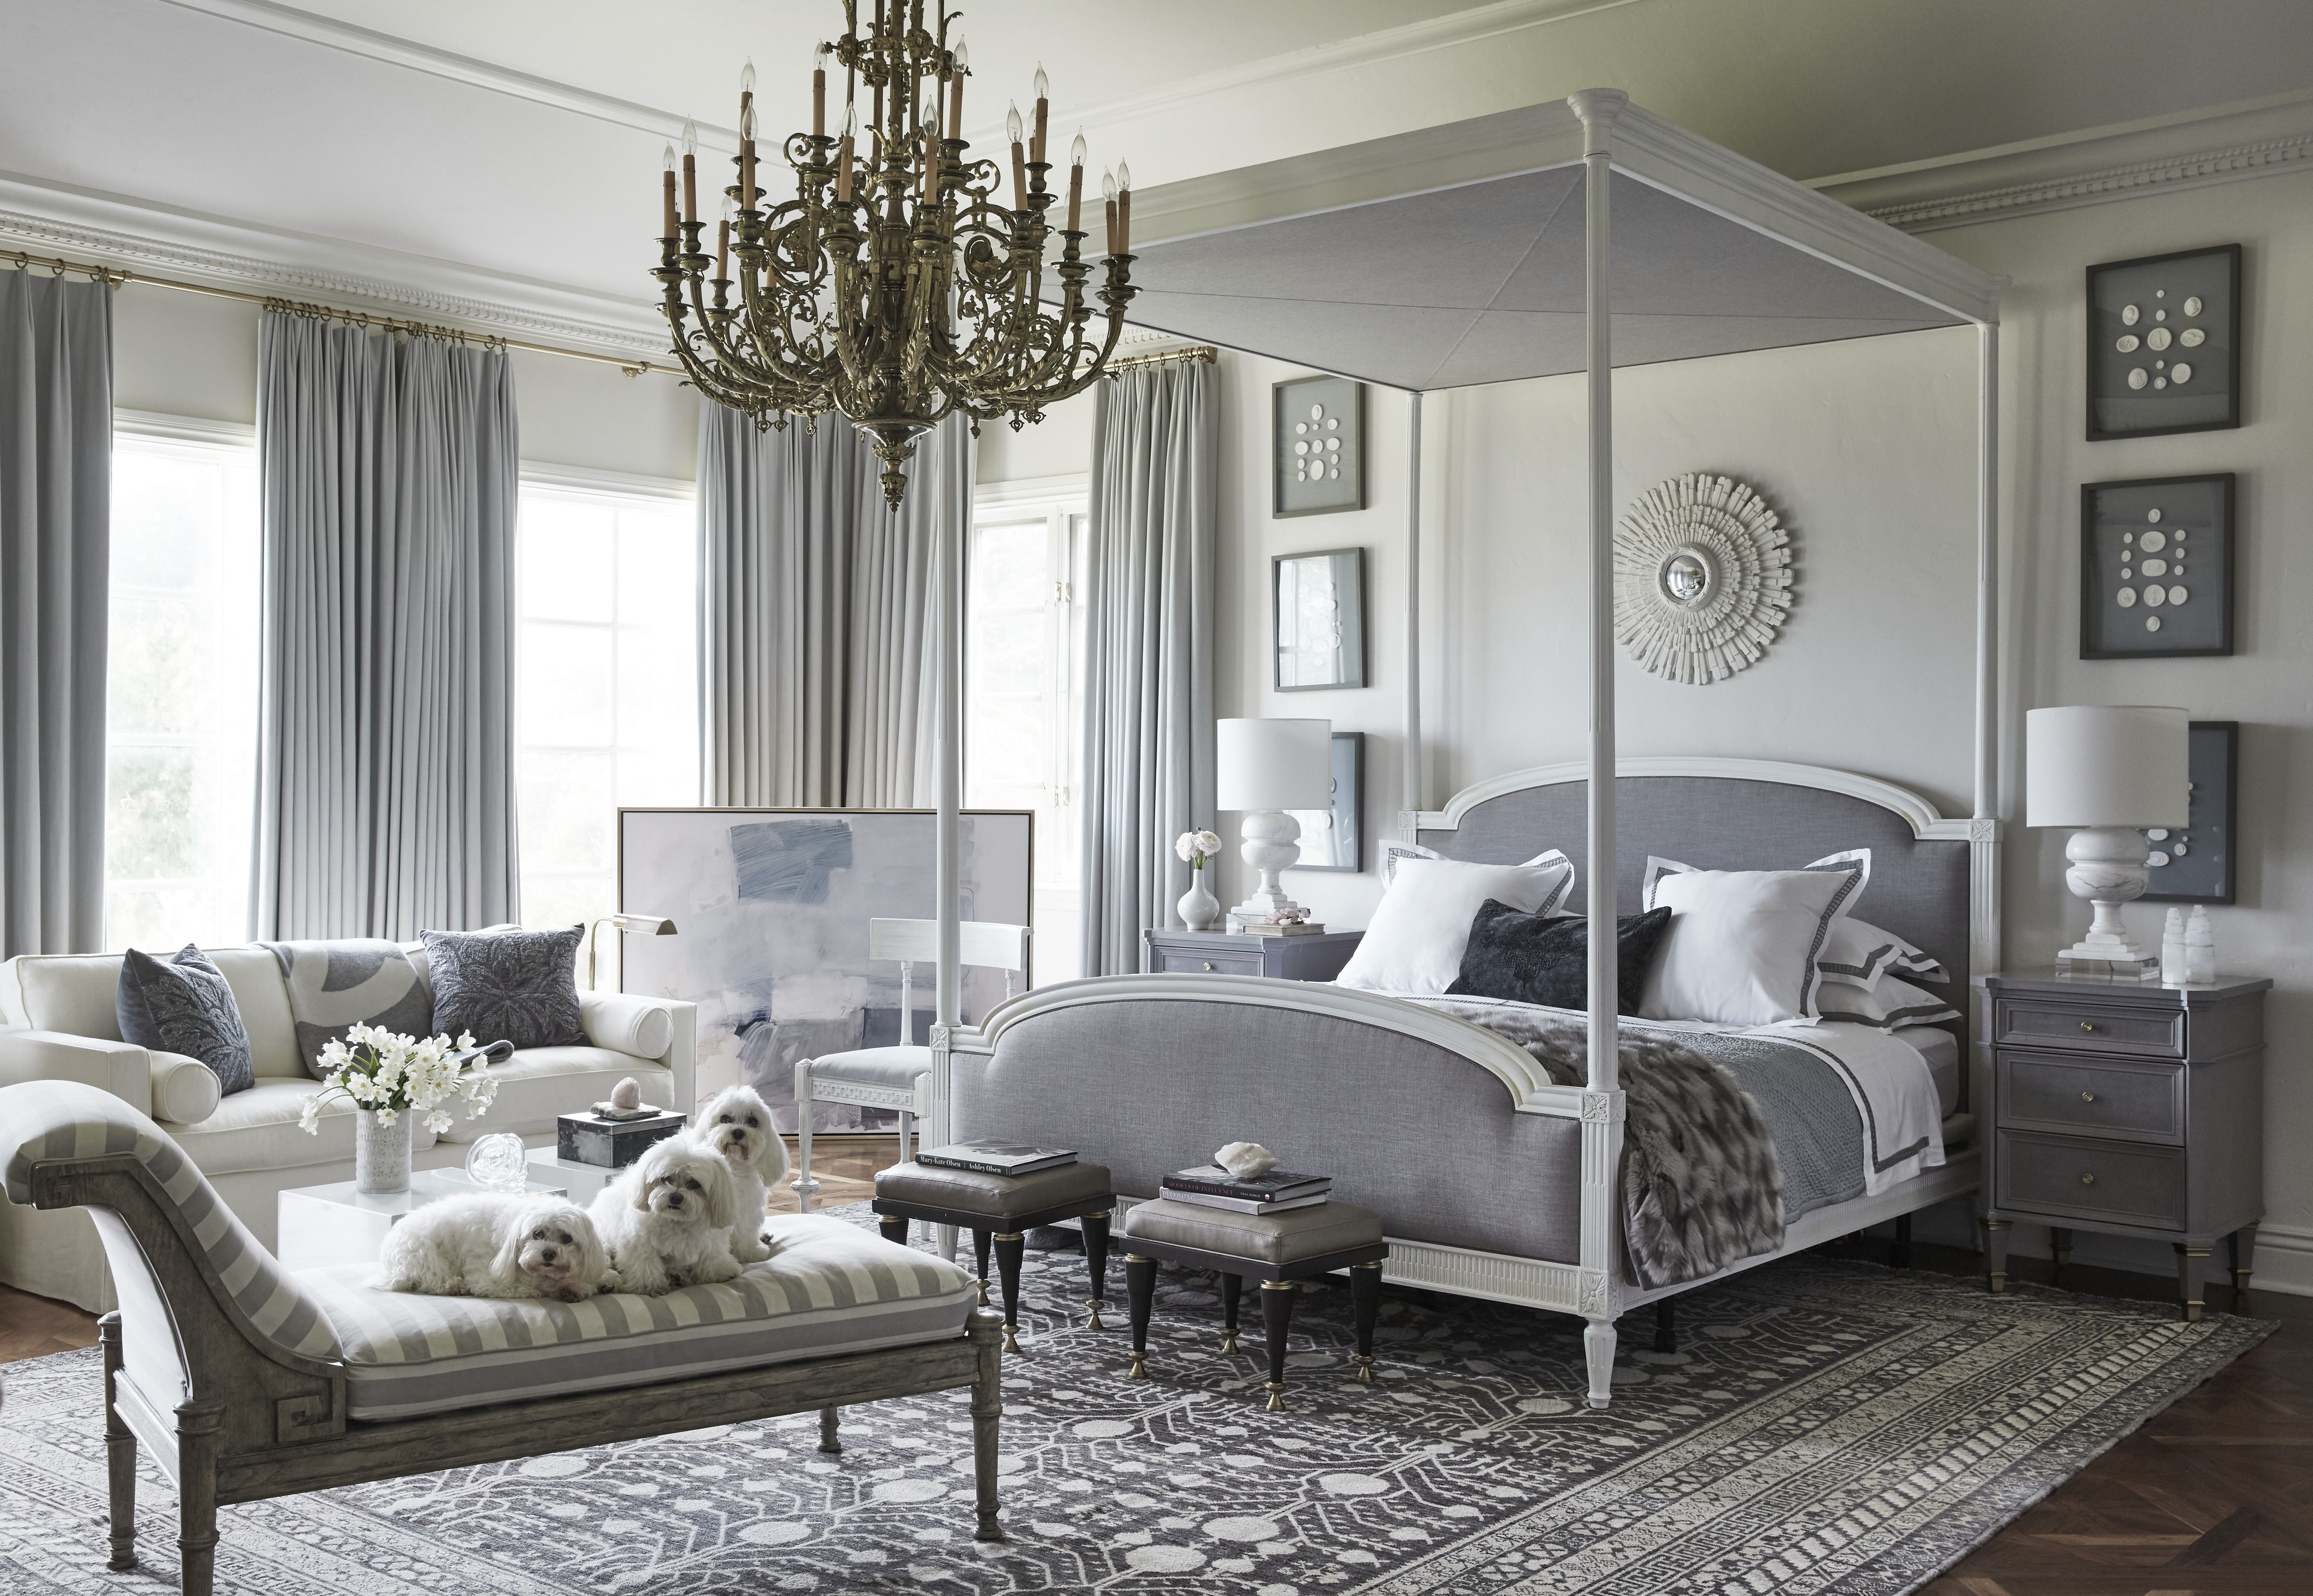 Modern Bedroom Decor With Gray Closets